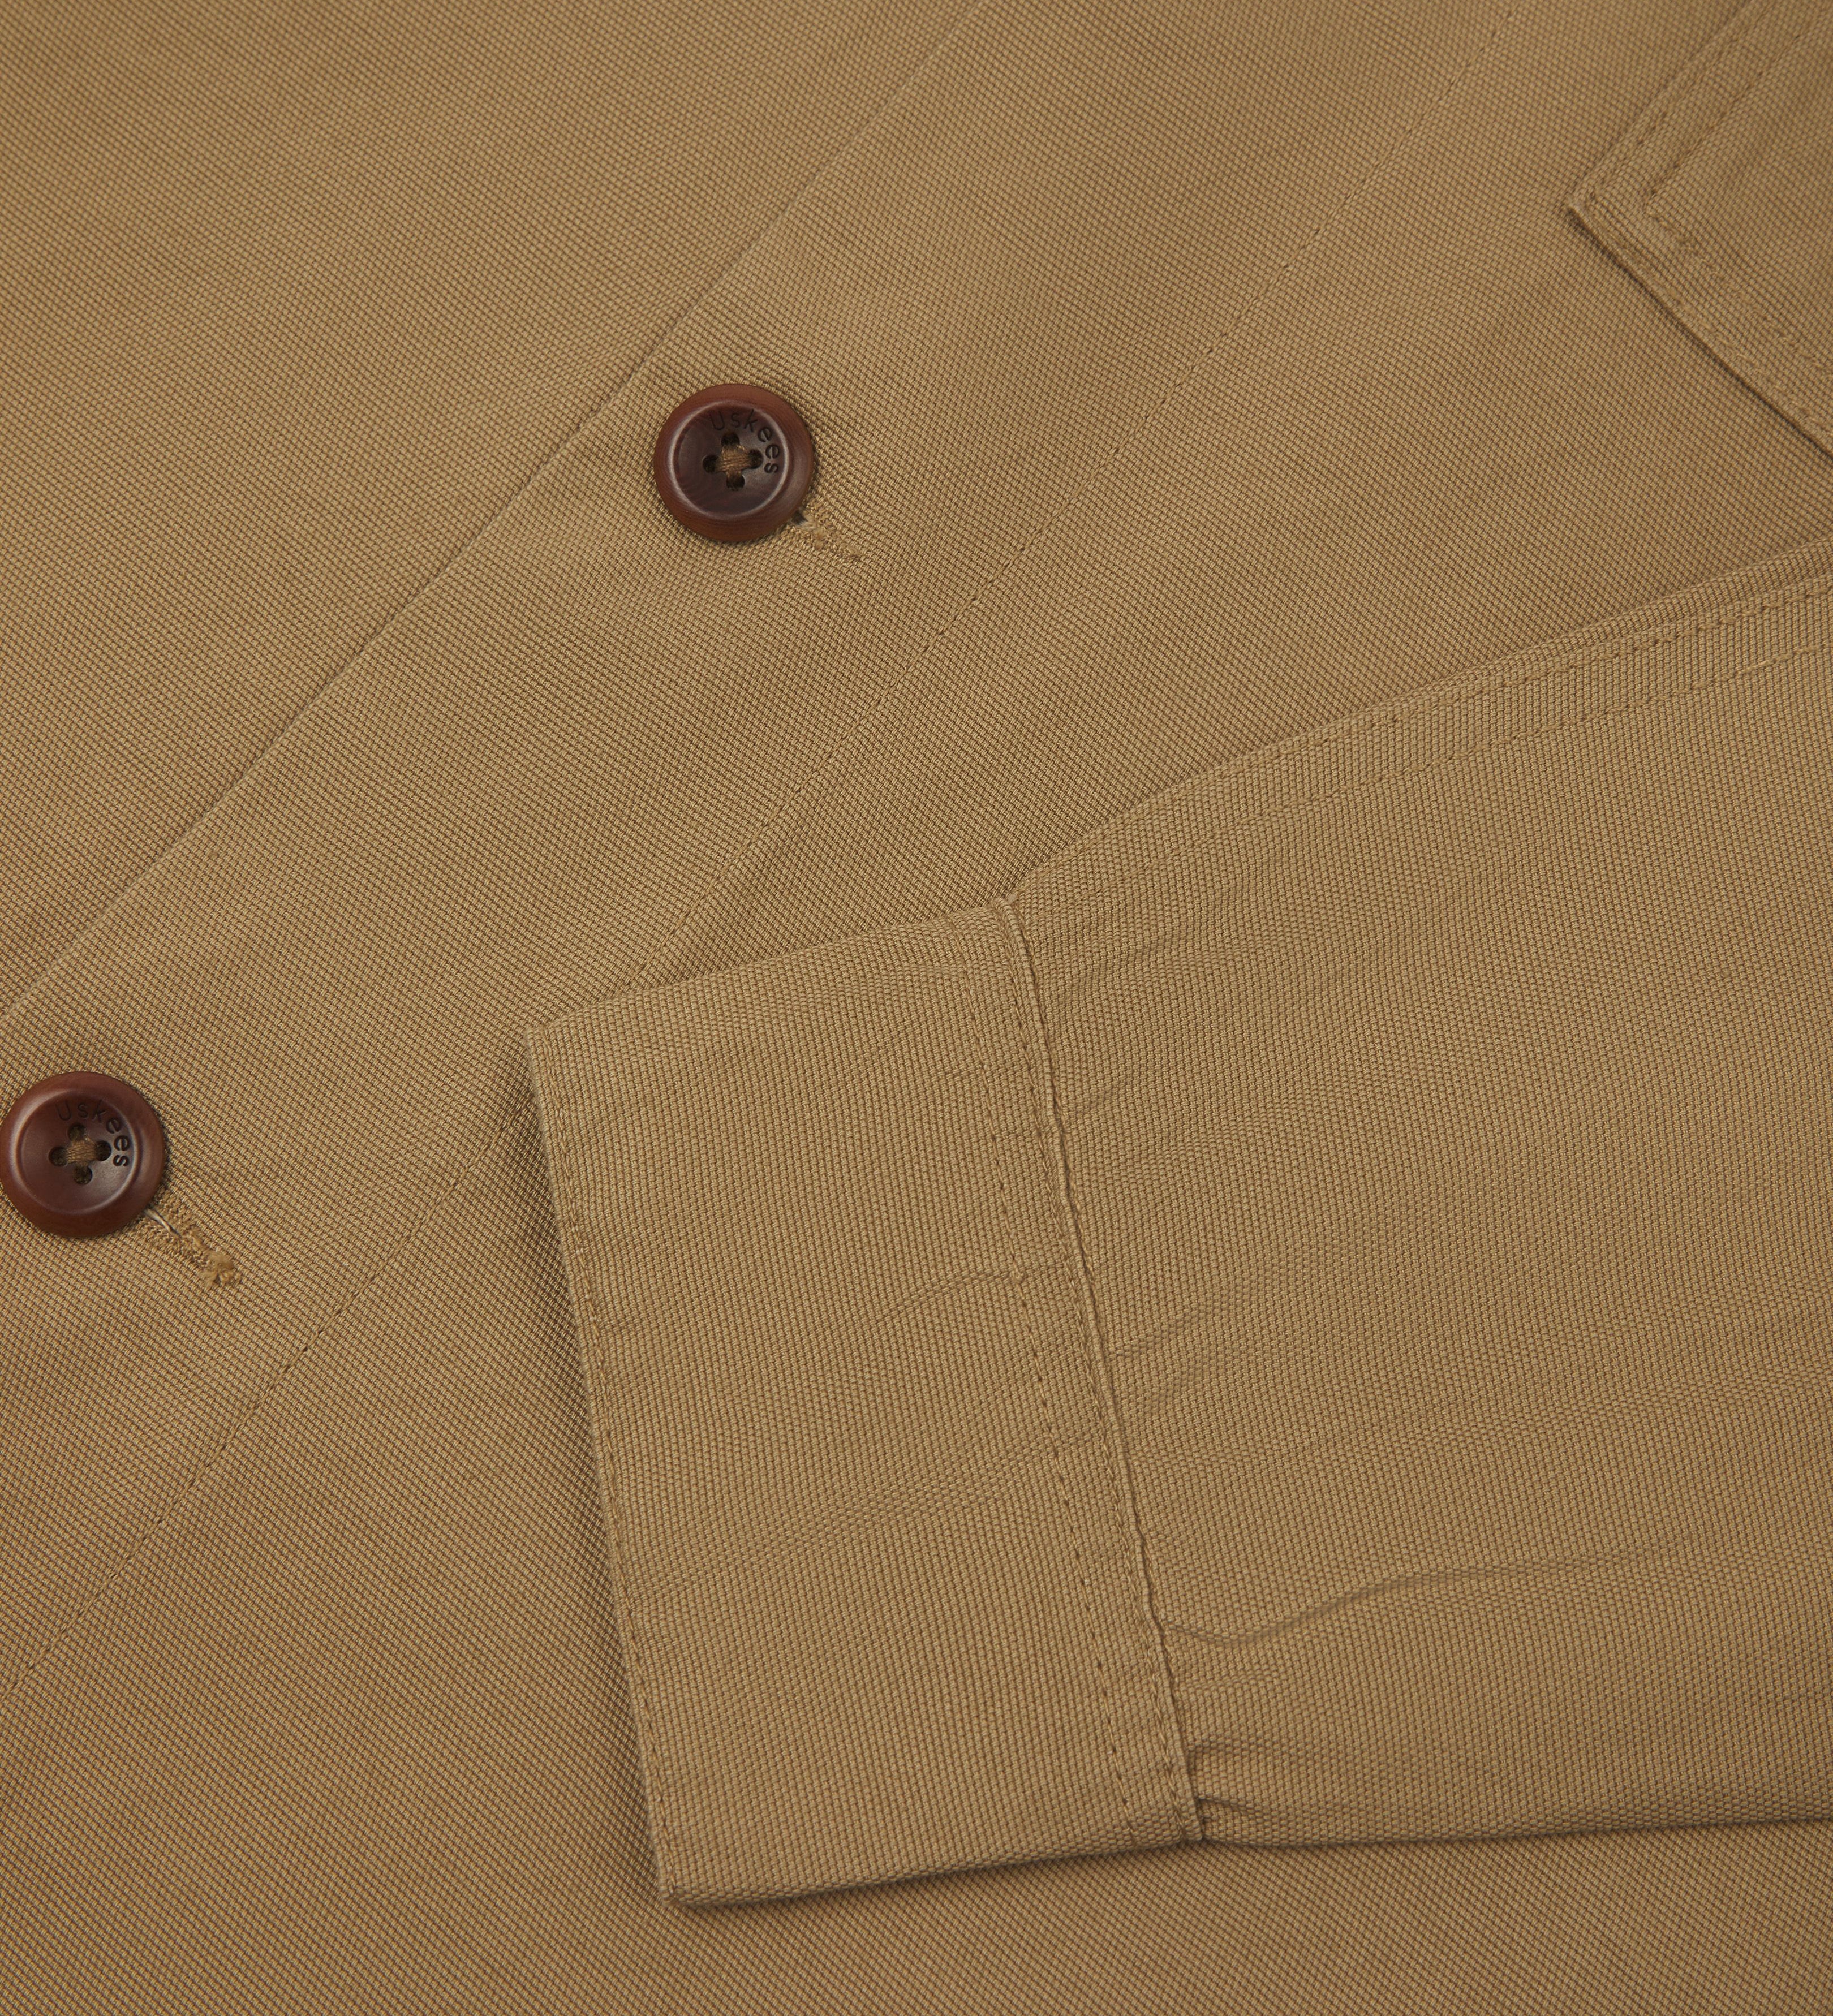 Close-up view of khaki buttoned 3003 workshirt for men from Uskees, showing sleeve and corozo button detail.